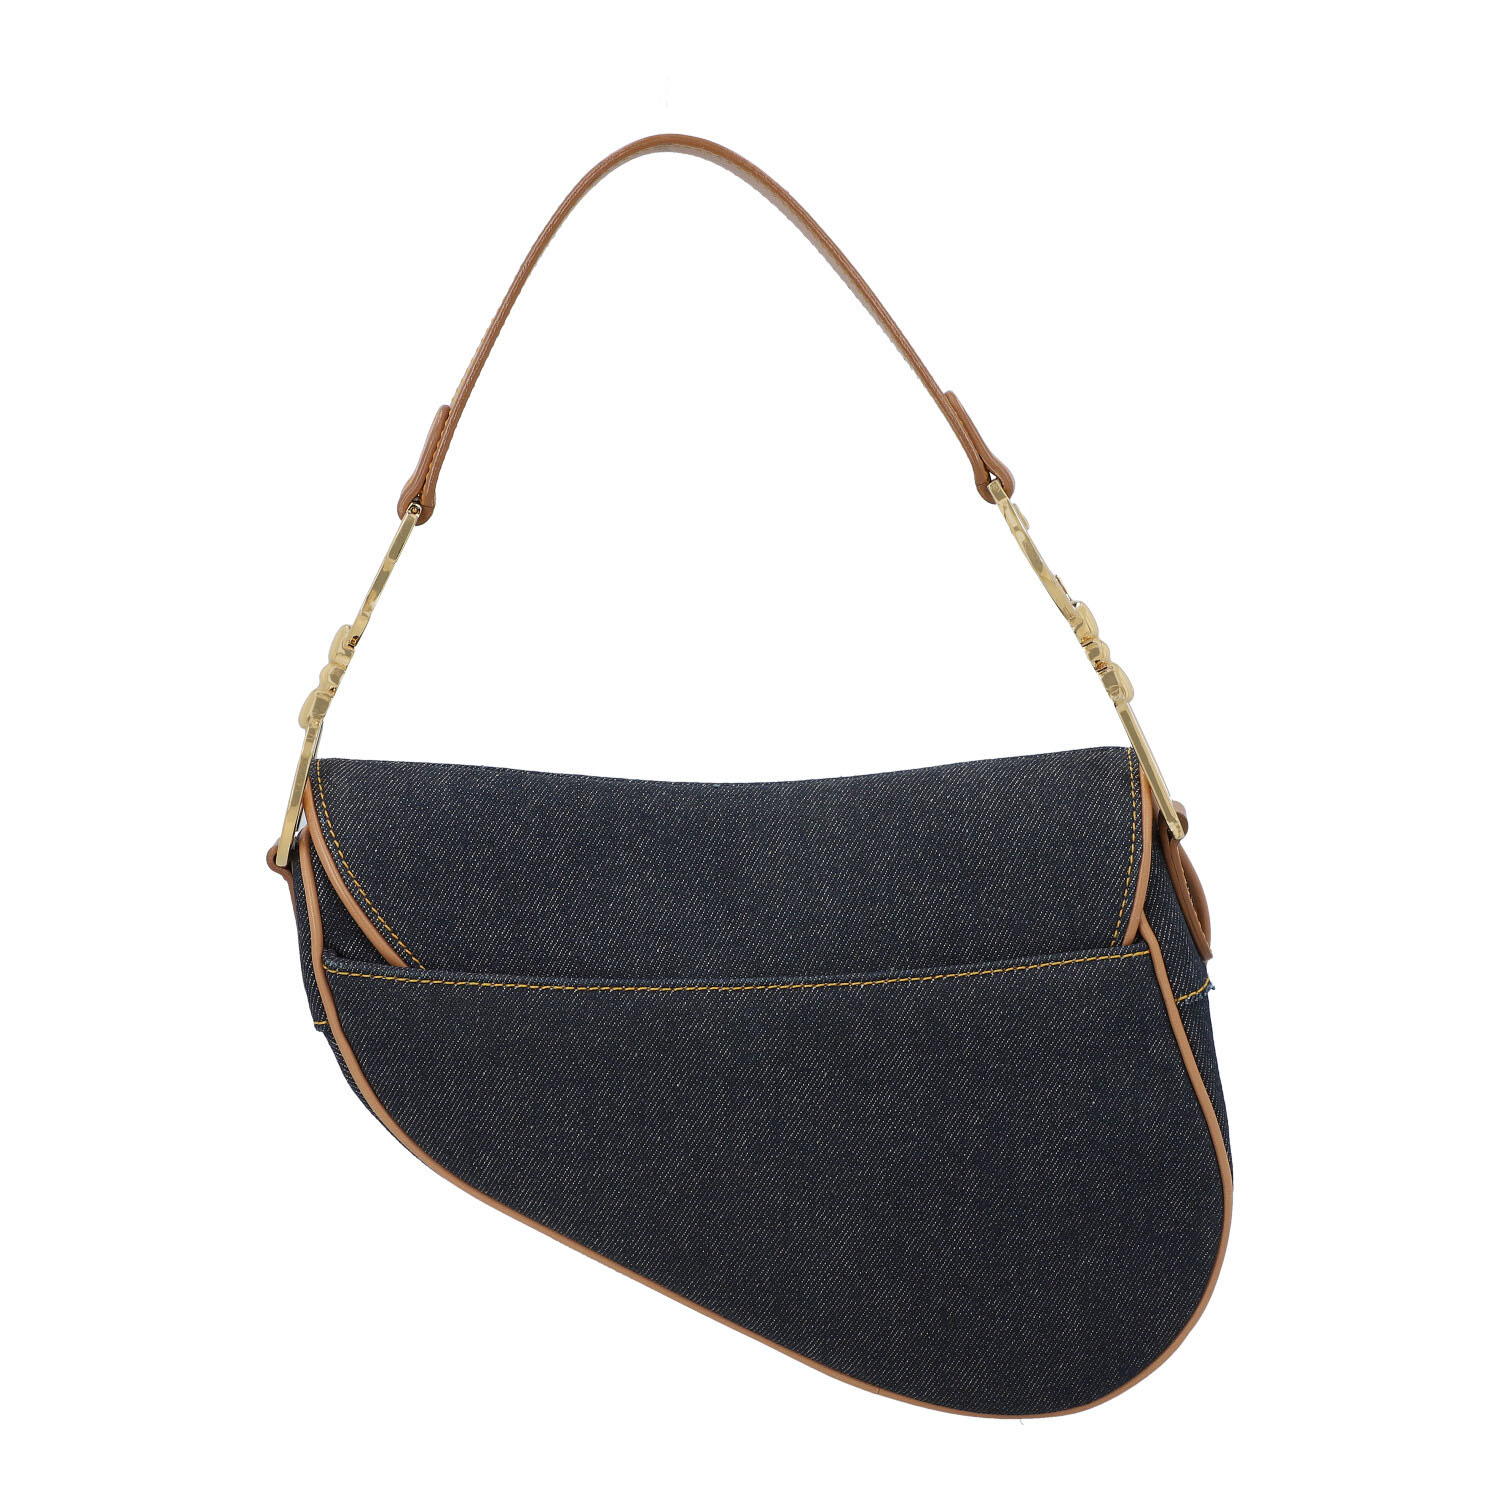 CHRISTIAN DIOR Schultertasche "SADDLE BAG". - Image 4 of 8